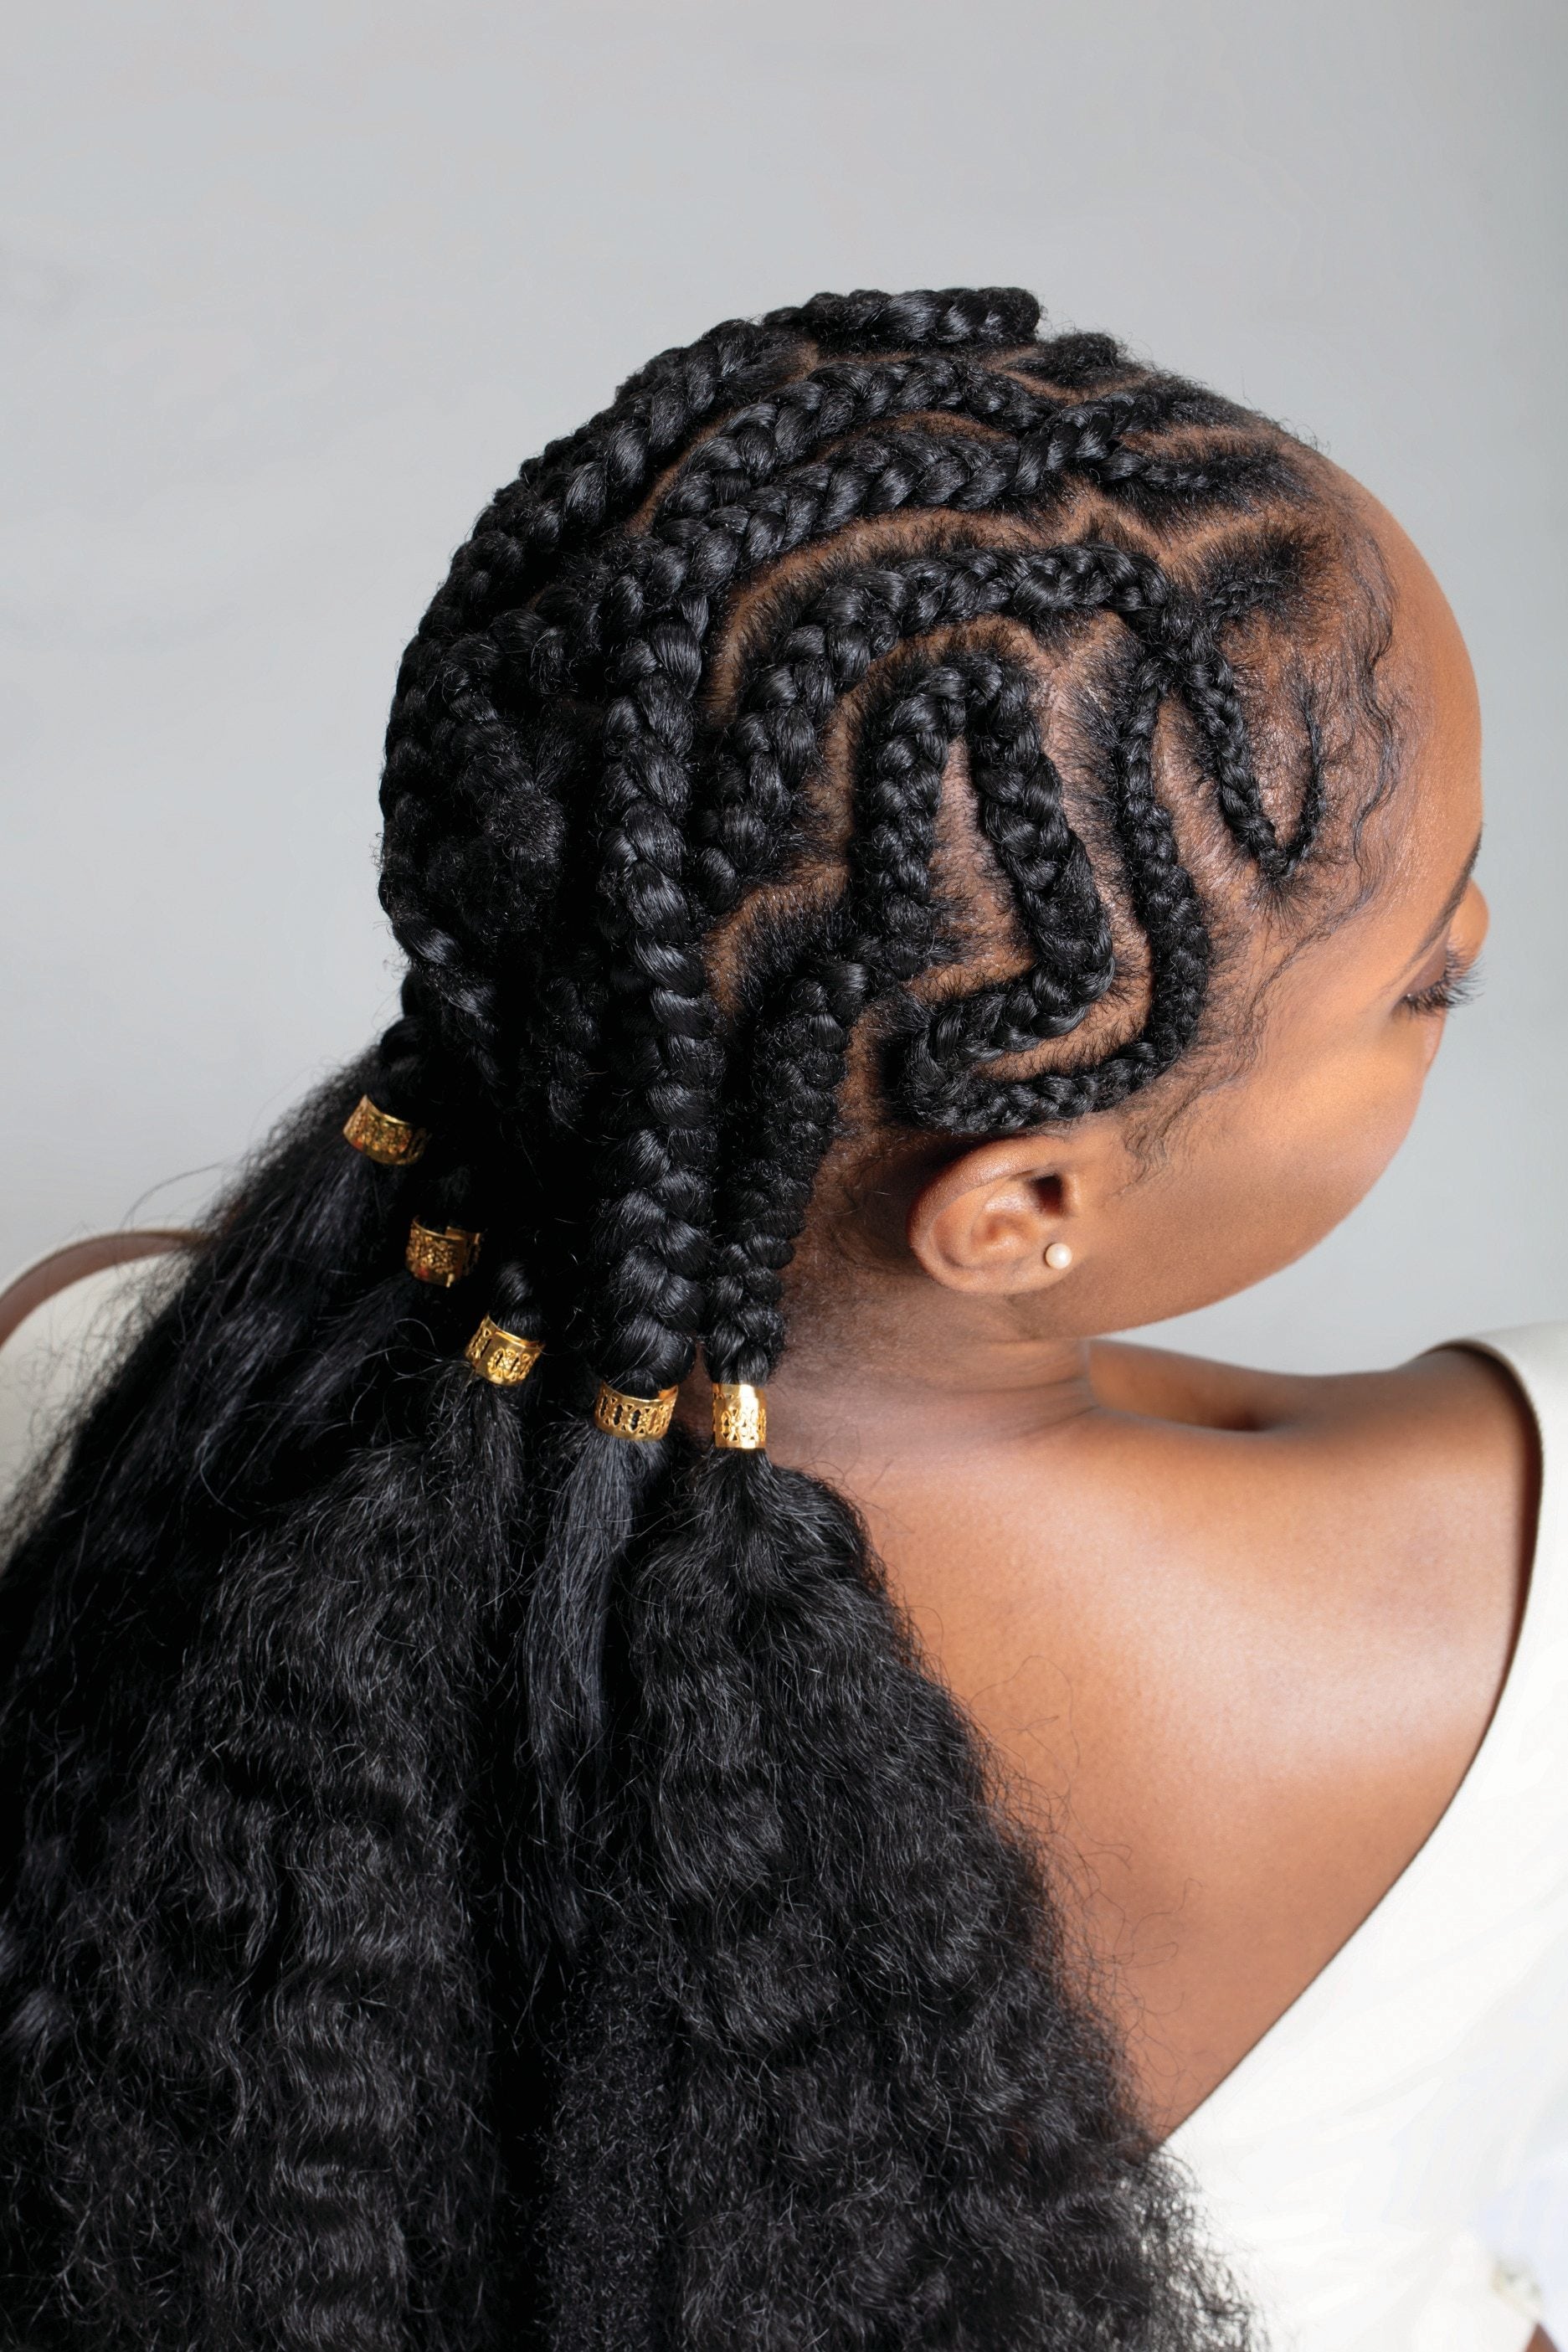 Tribal Tresses: The Beauty Of Our Braids Exceeds The Intricacy Of The Design